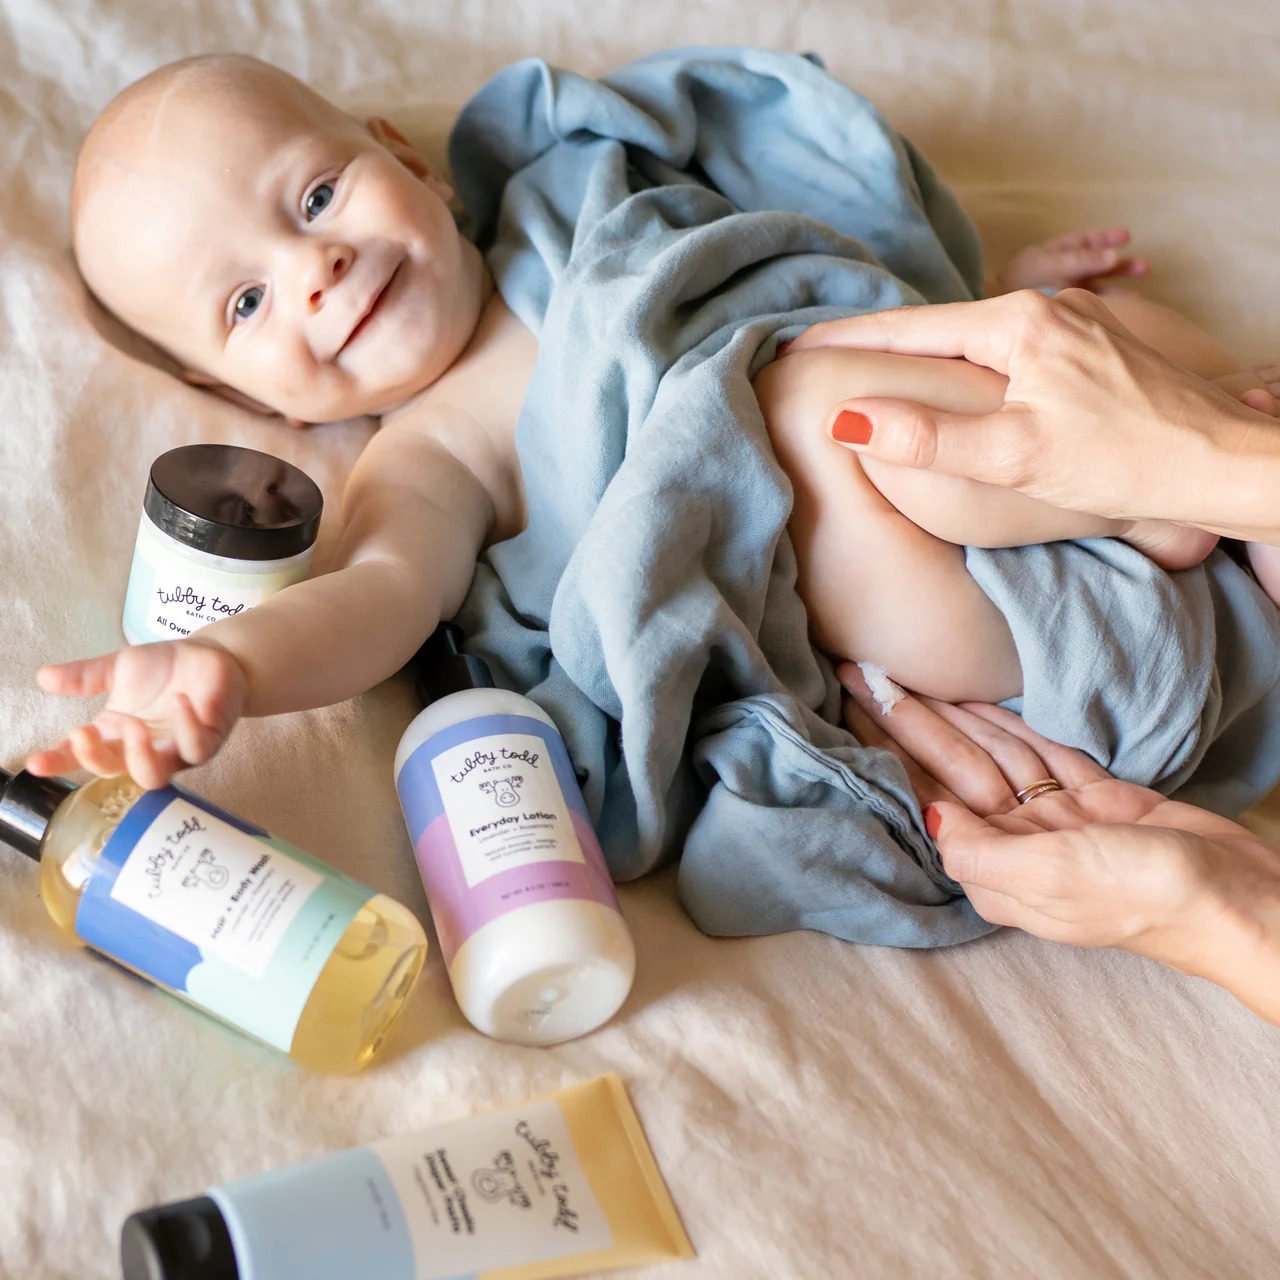 The baby skincare market is continuing to expand, with brands like Tubby Todd at the forefront. Photo: Handout